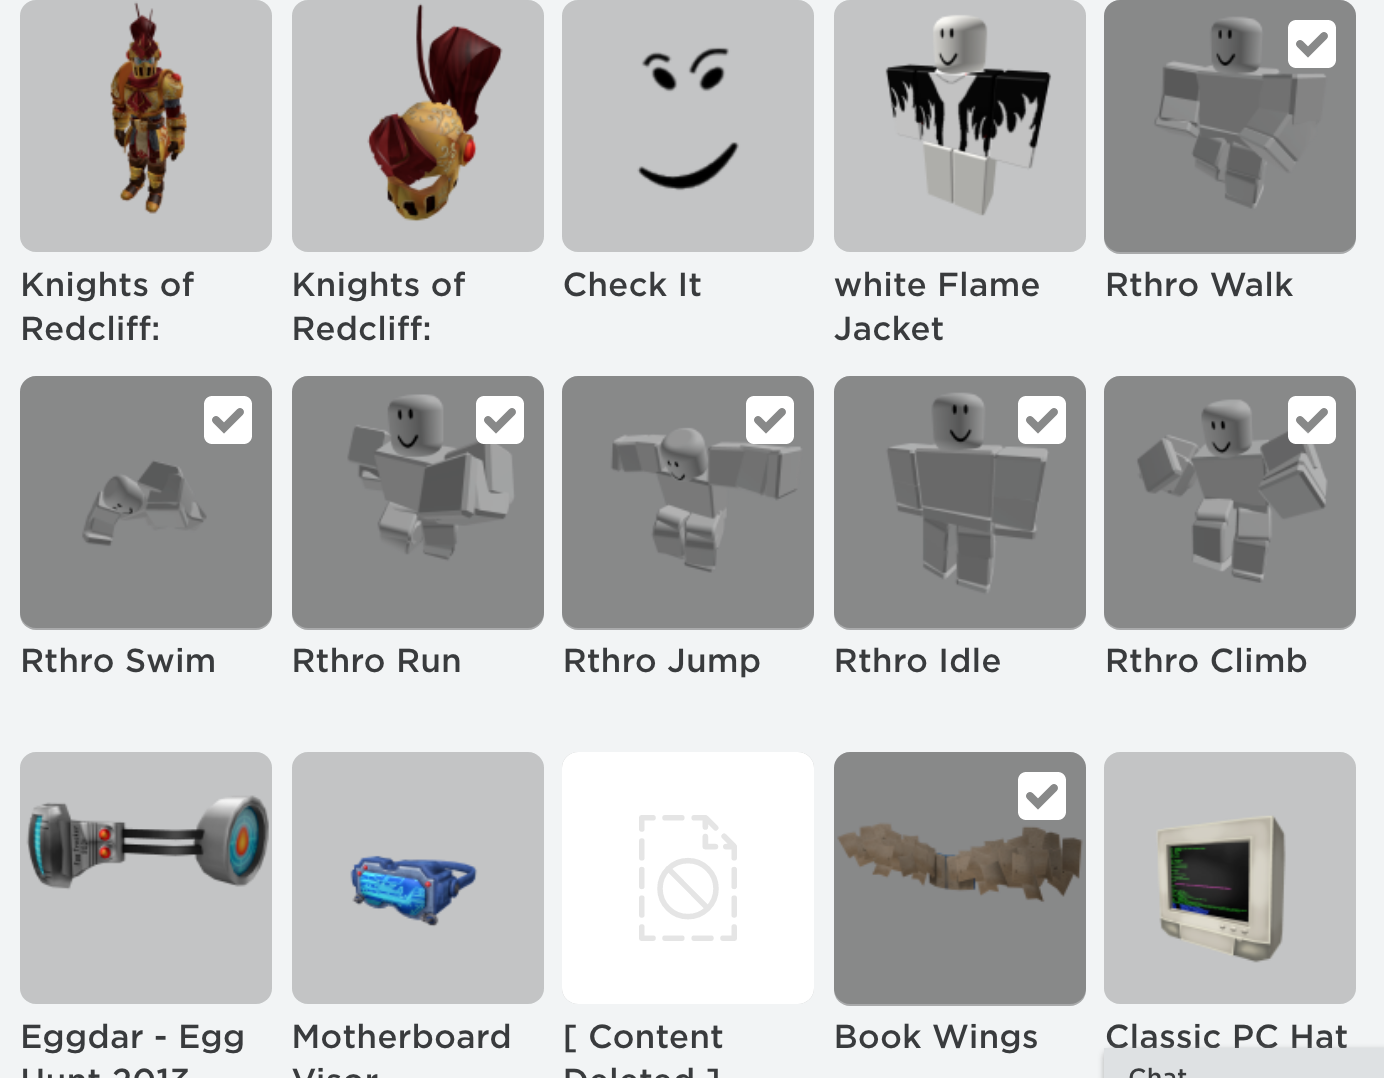 Selling 2013 stacked korblox account - EpicNPC